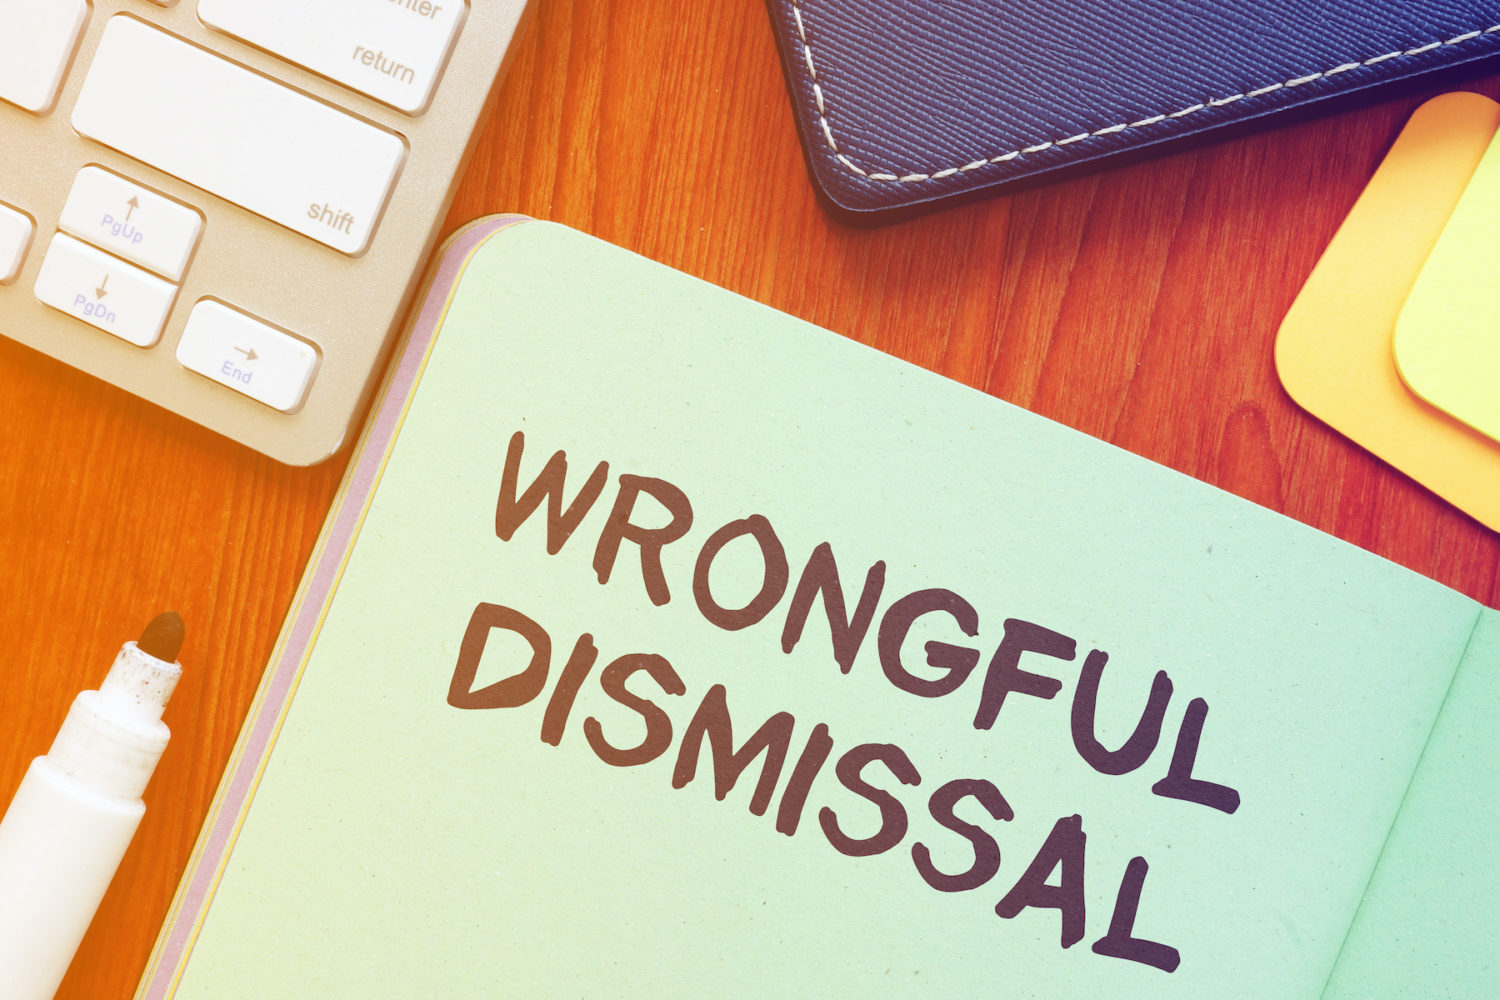 Wrongful Dismissal and Employment Practices Liability - ALIGNED Insurance brokers